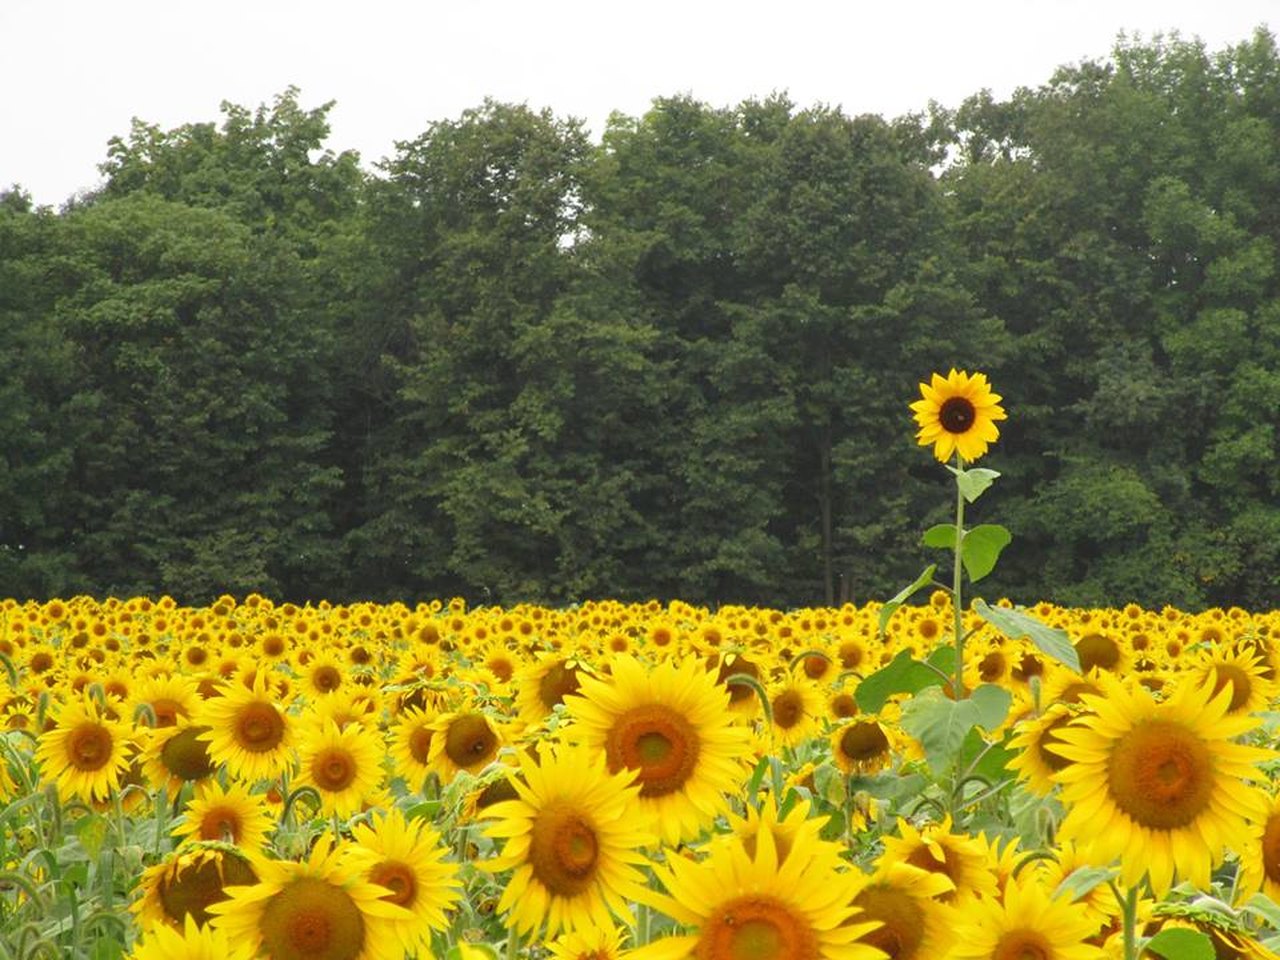 This Farm Has One Of The Most Beautiful Sunflower Fields In Minnesota